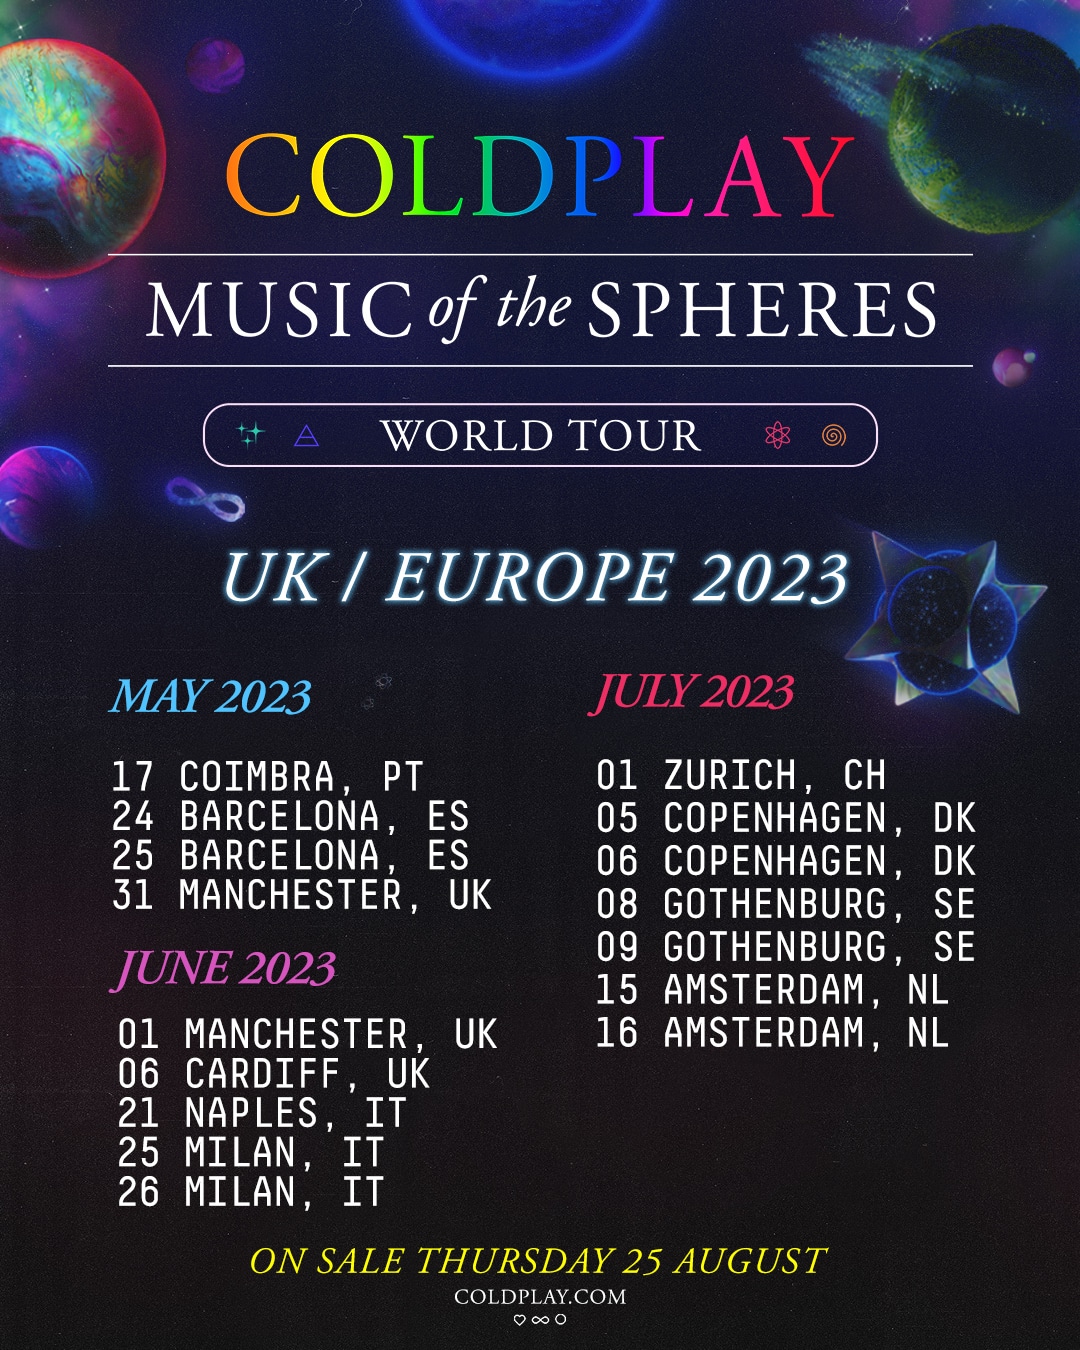 Coldplay Music of the Spheres Tour Heading to Cardiff Ticket Link Here